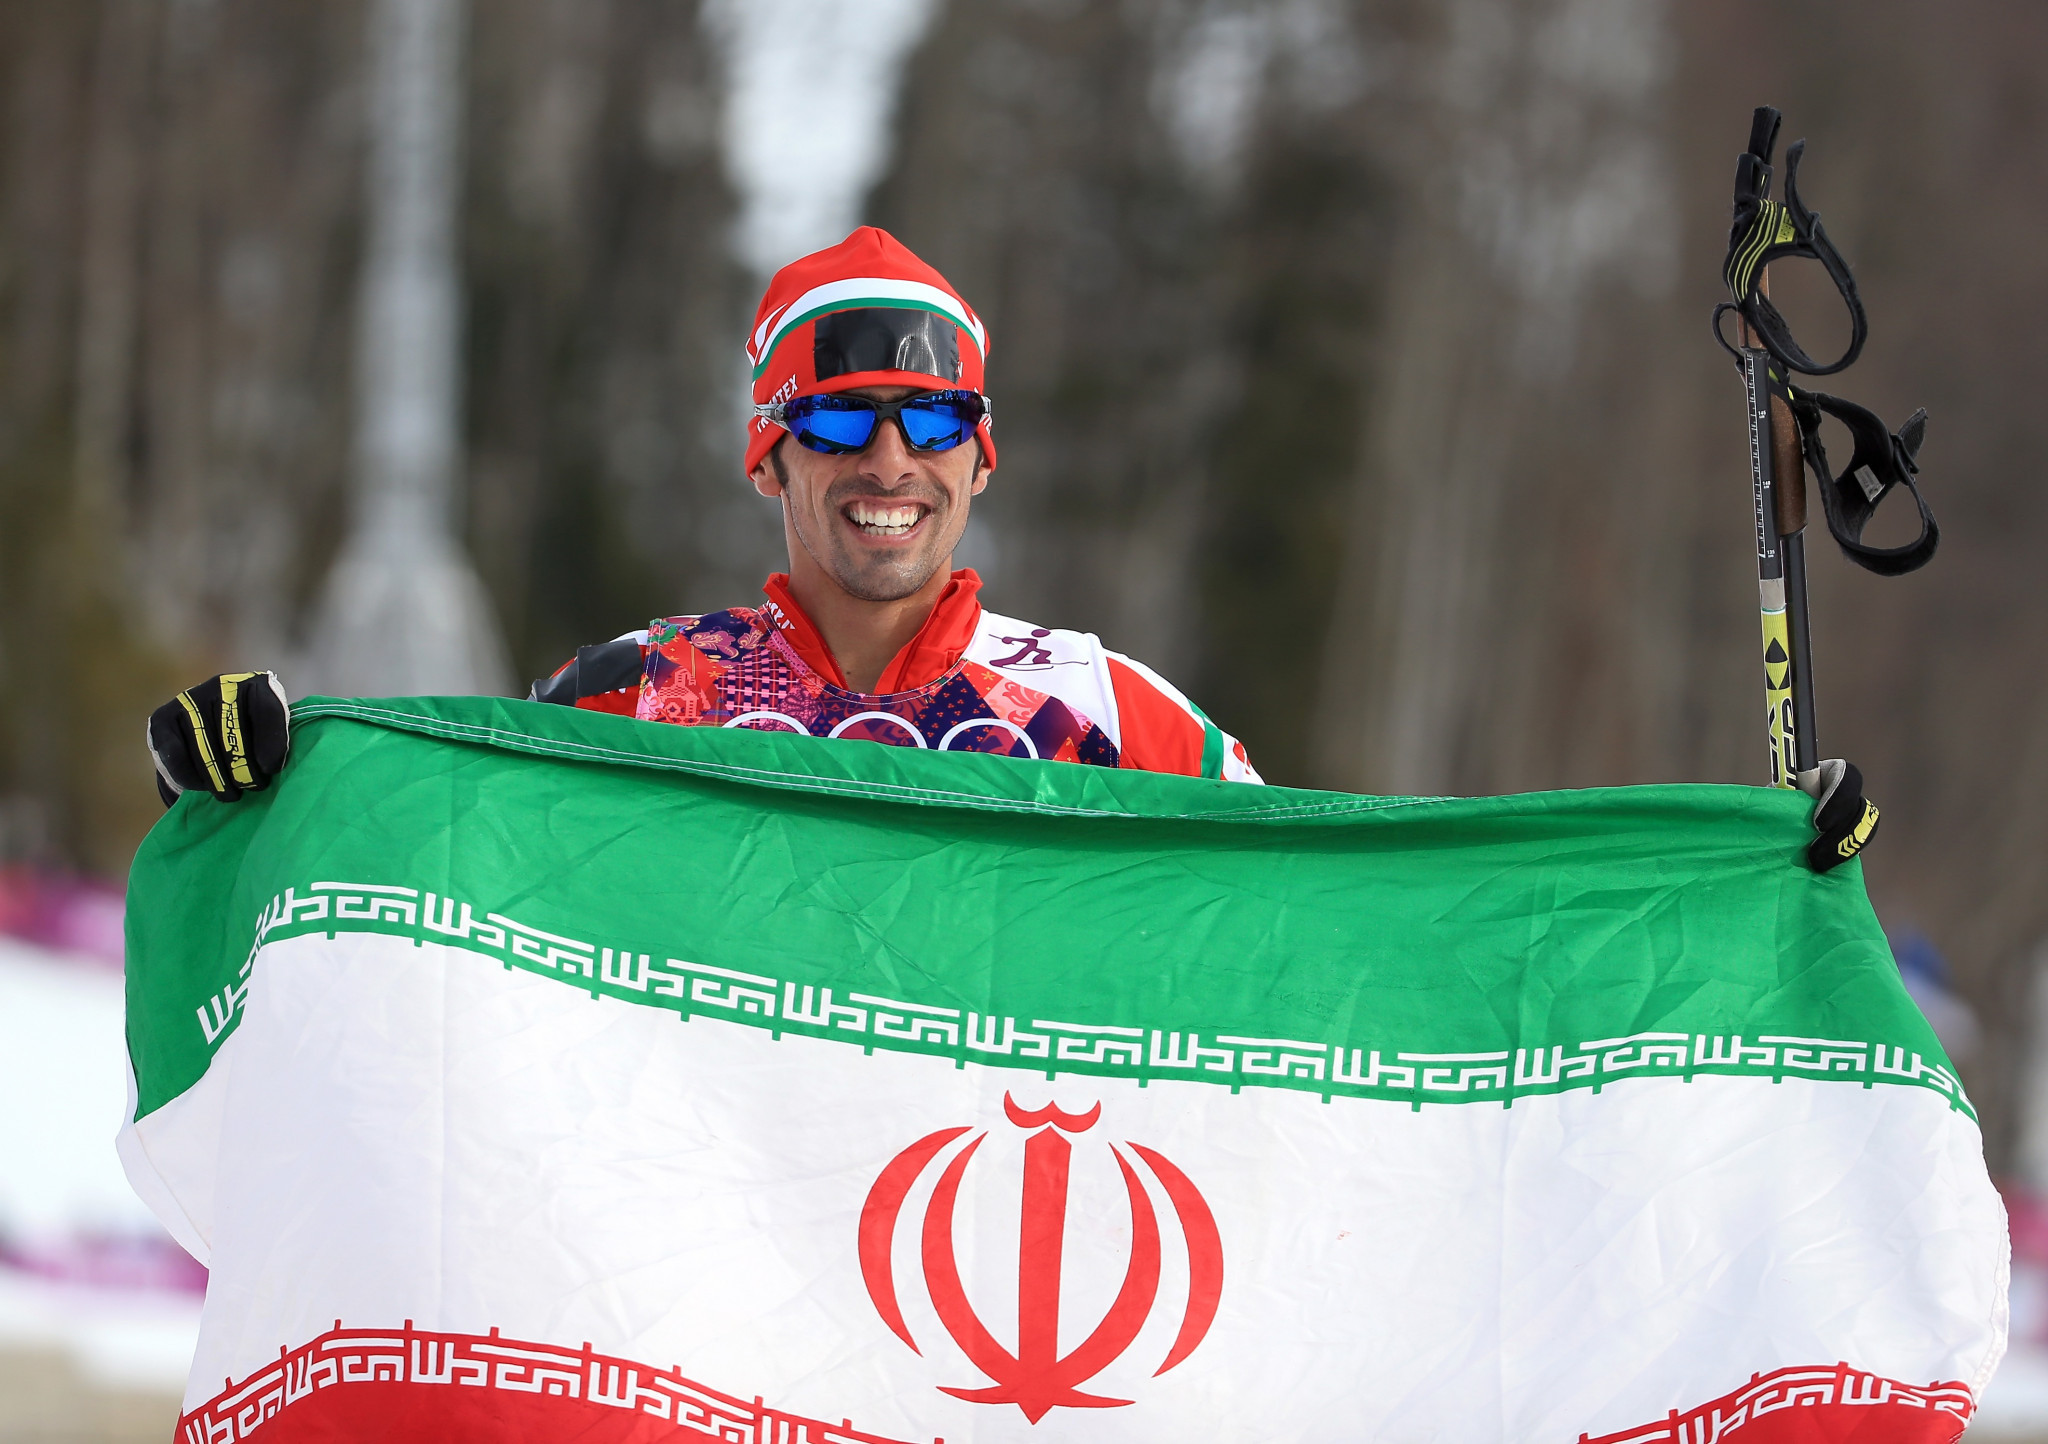 Seyed Sattar Seyd was due to carry Iran's flag along with Atefeh Ahmadi at the Opening Ceremony of Beijing 2022 but will now miss the Winter Olympics after testing positive for COVID-19 ©Getty Images